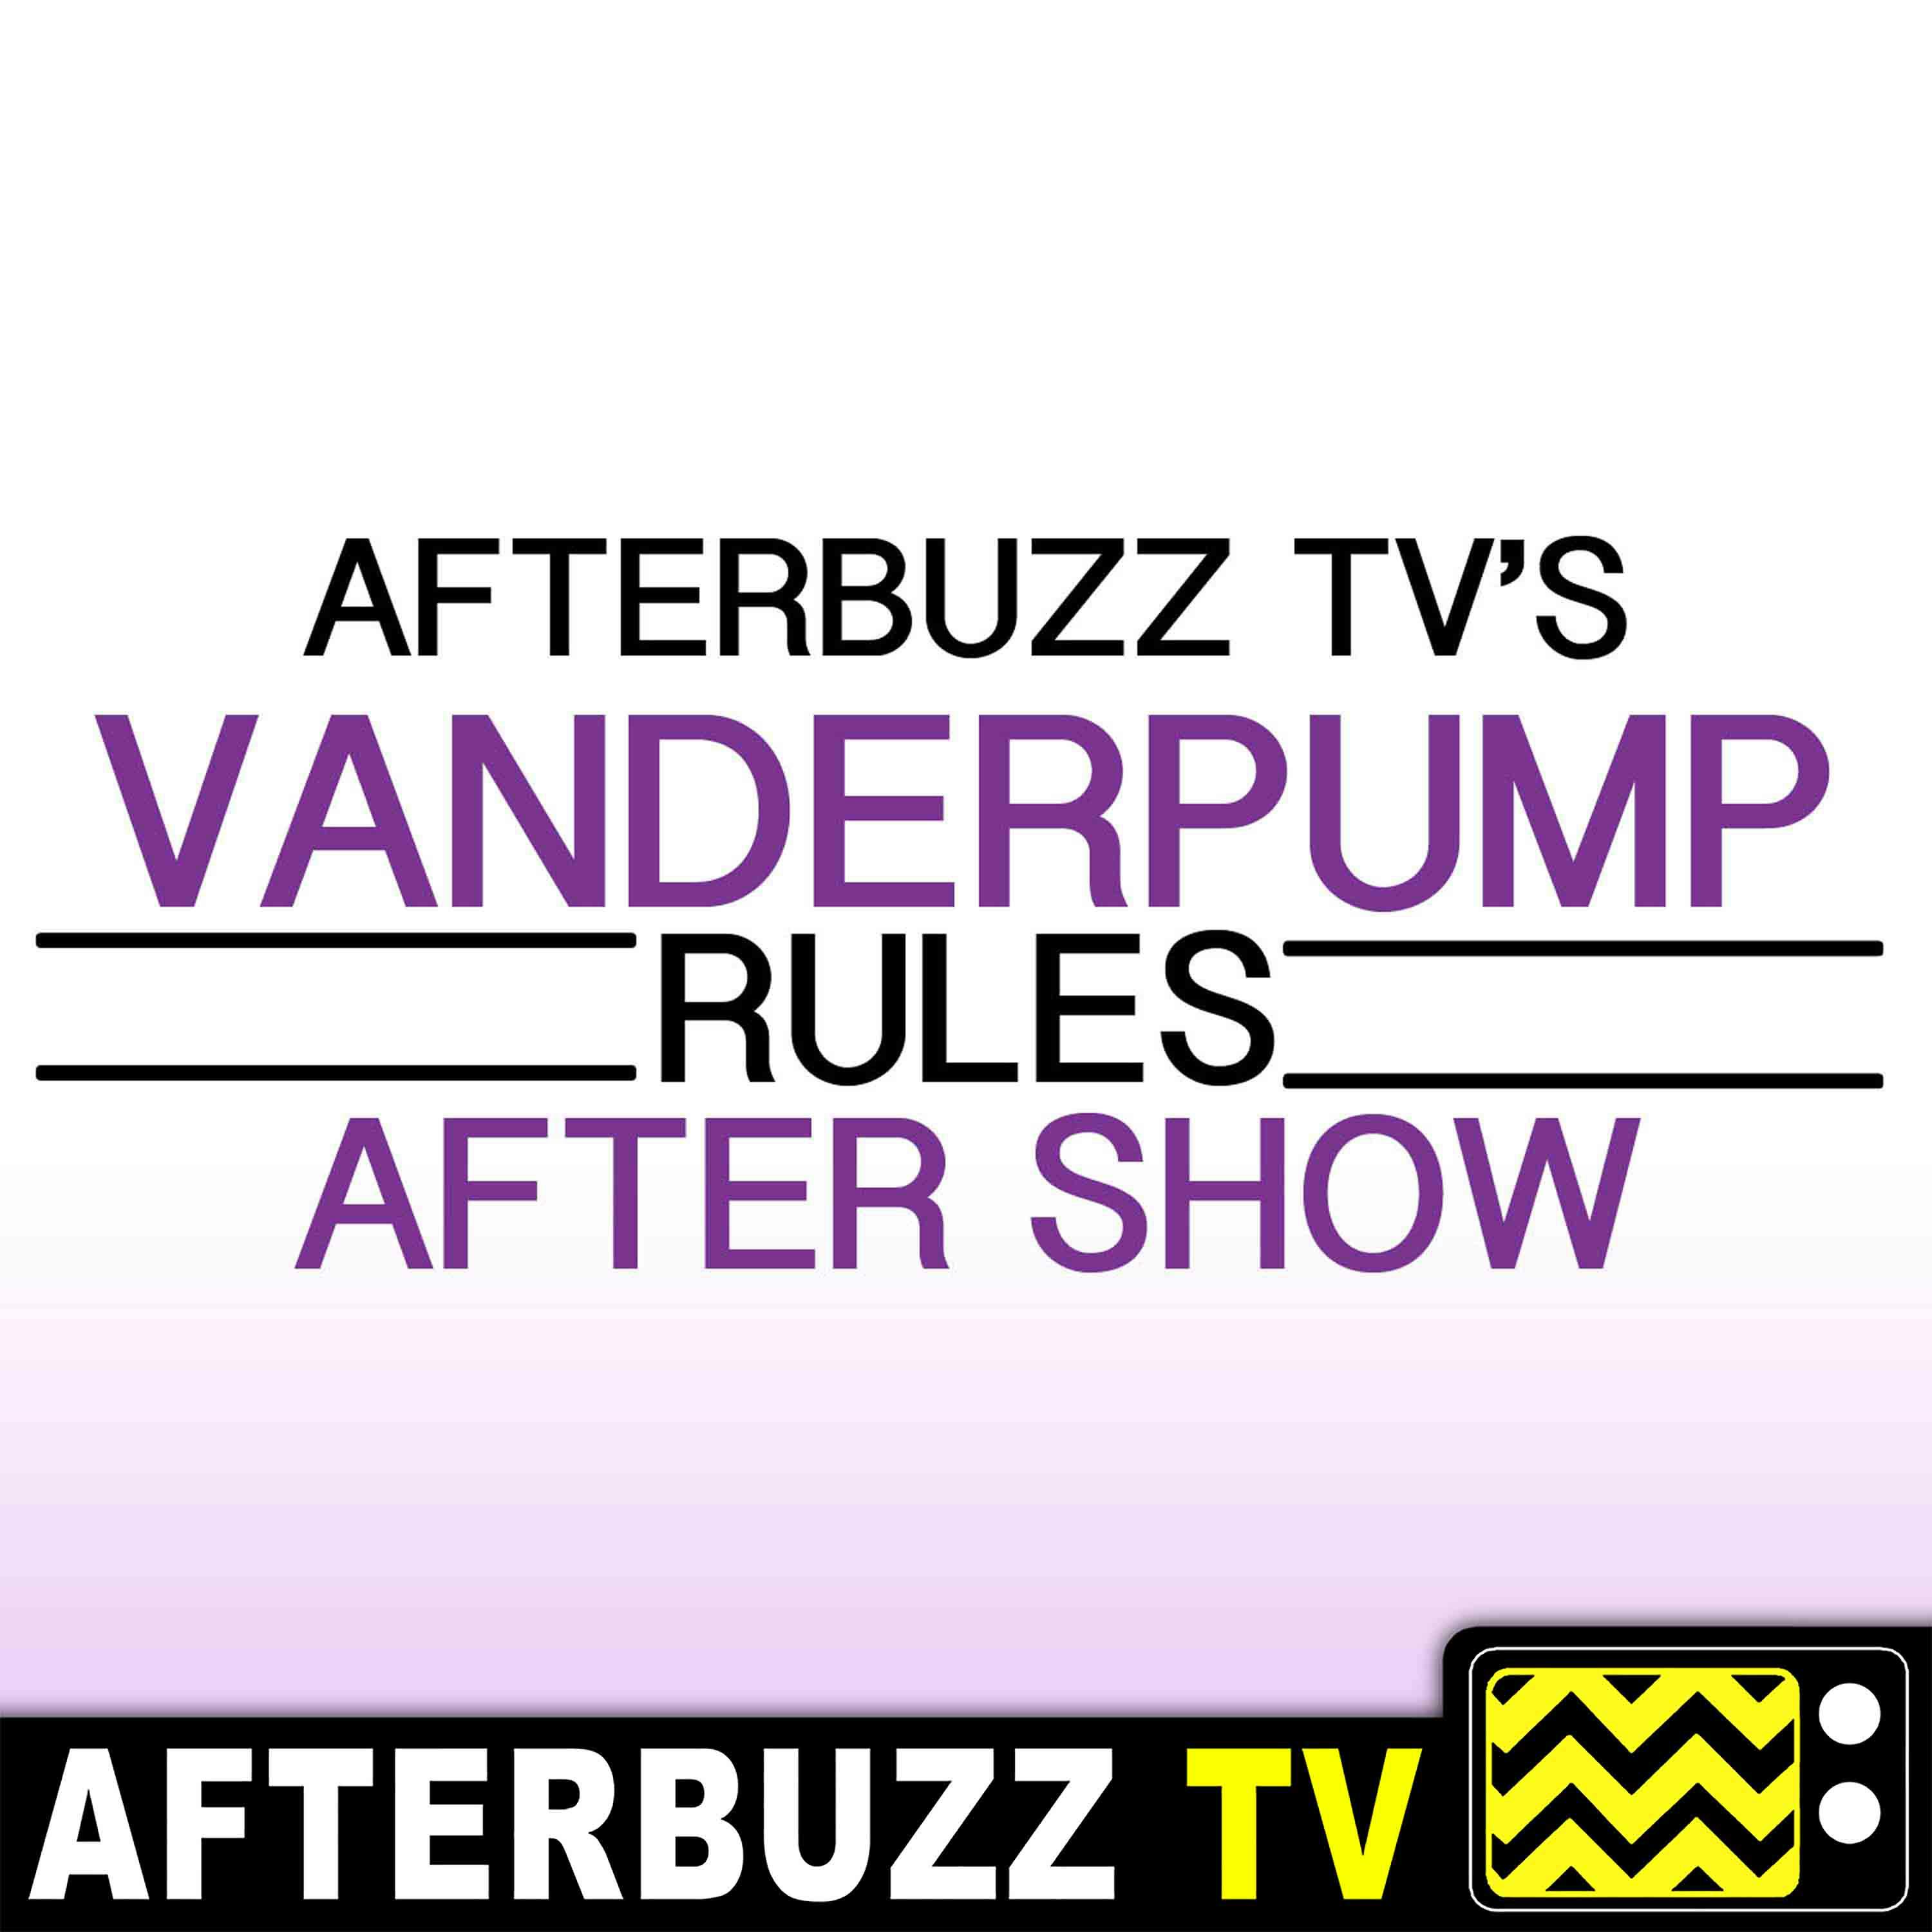 Vanderpump Rules S8 E17 Recap & After Show: First Comes Love, Then Comes Marriage…